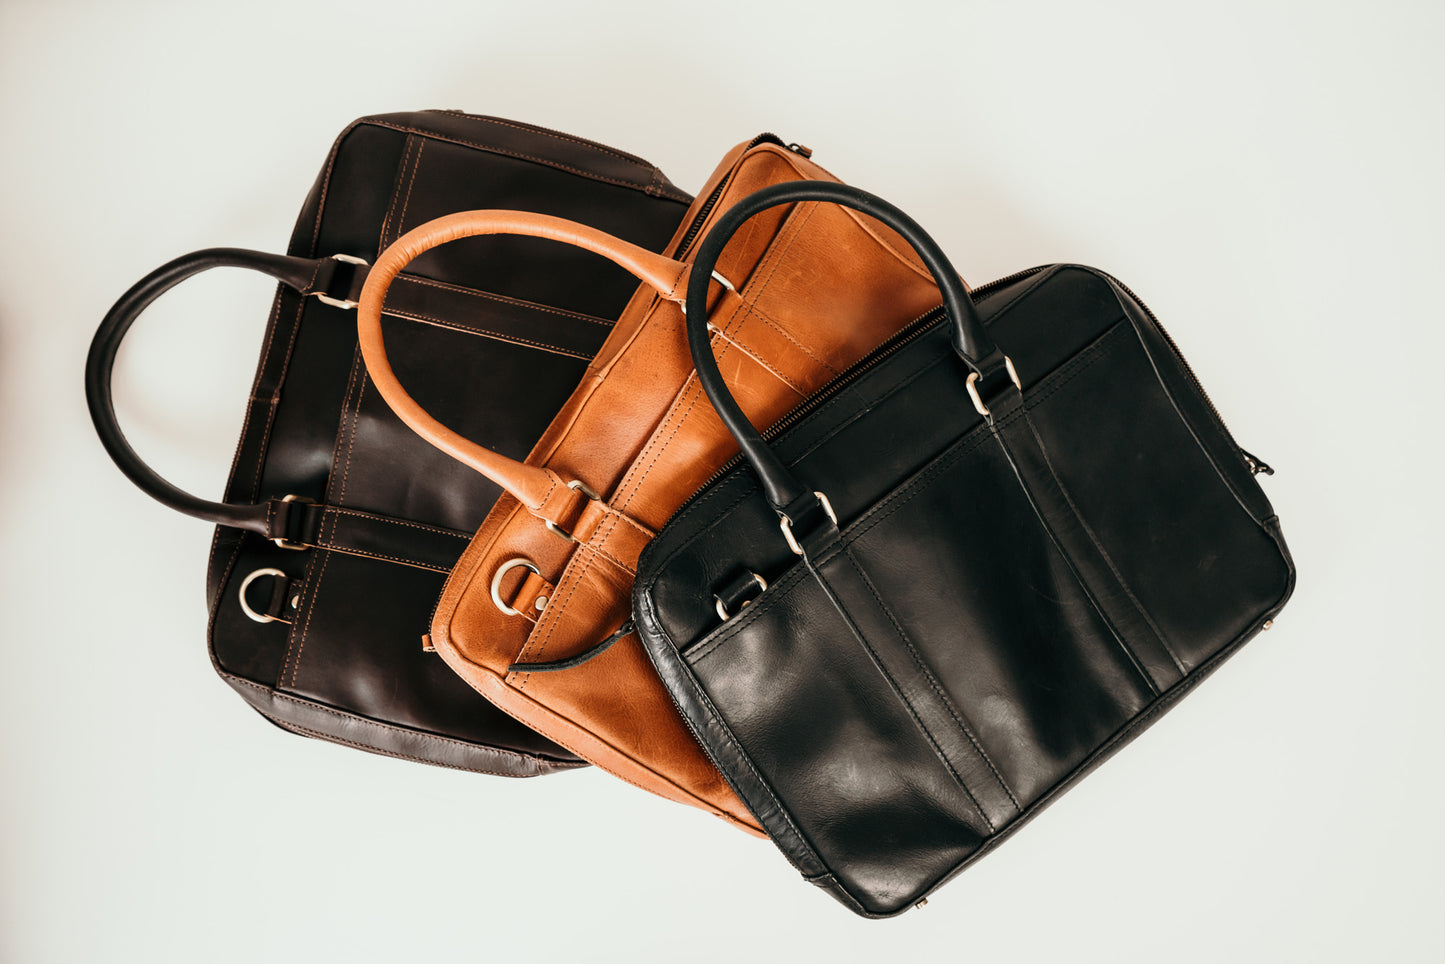 Advantages Of Buying a Leather Briefcase